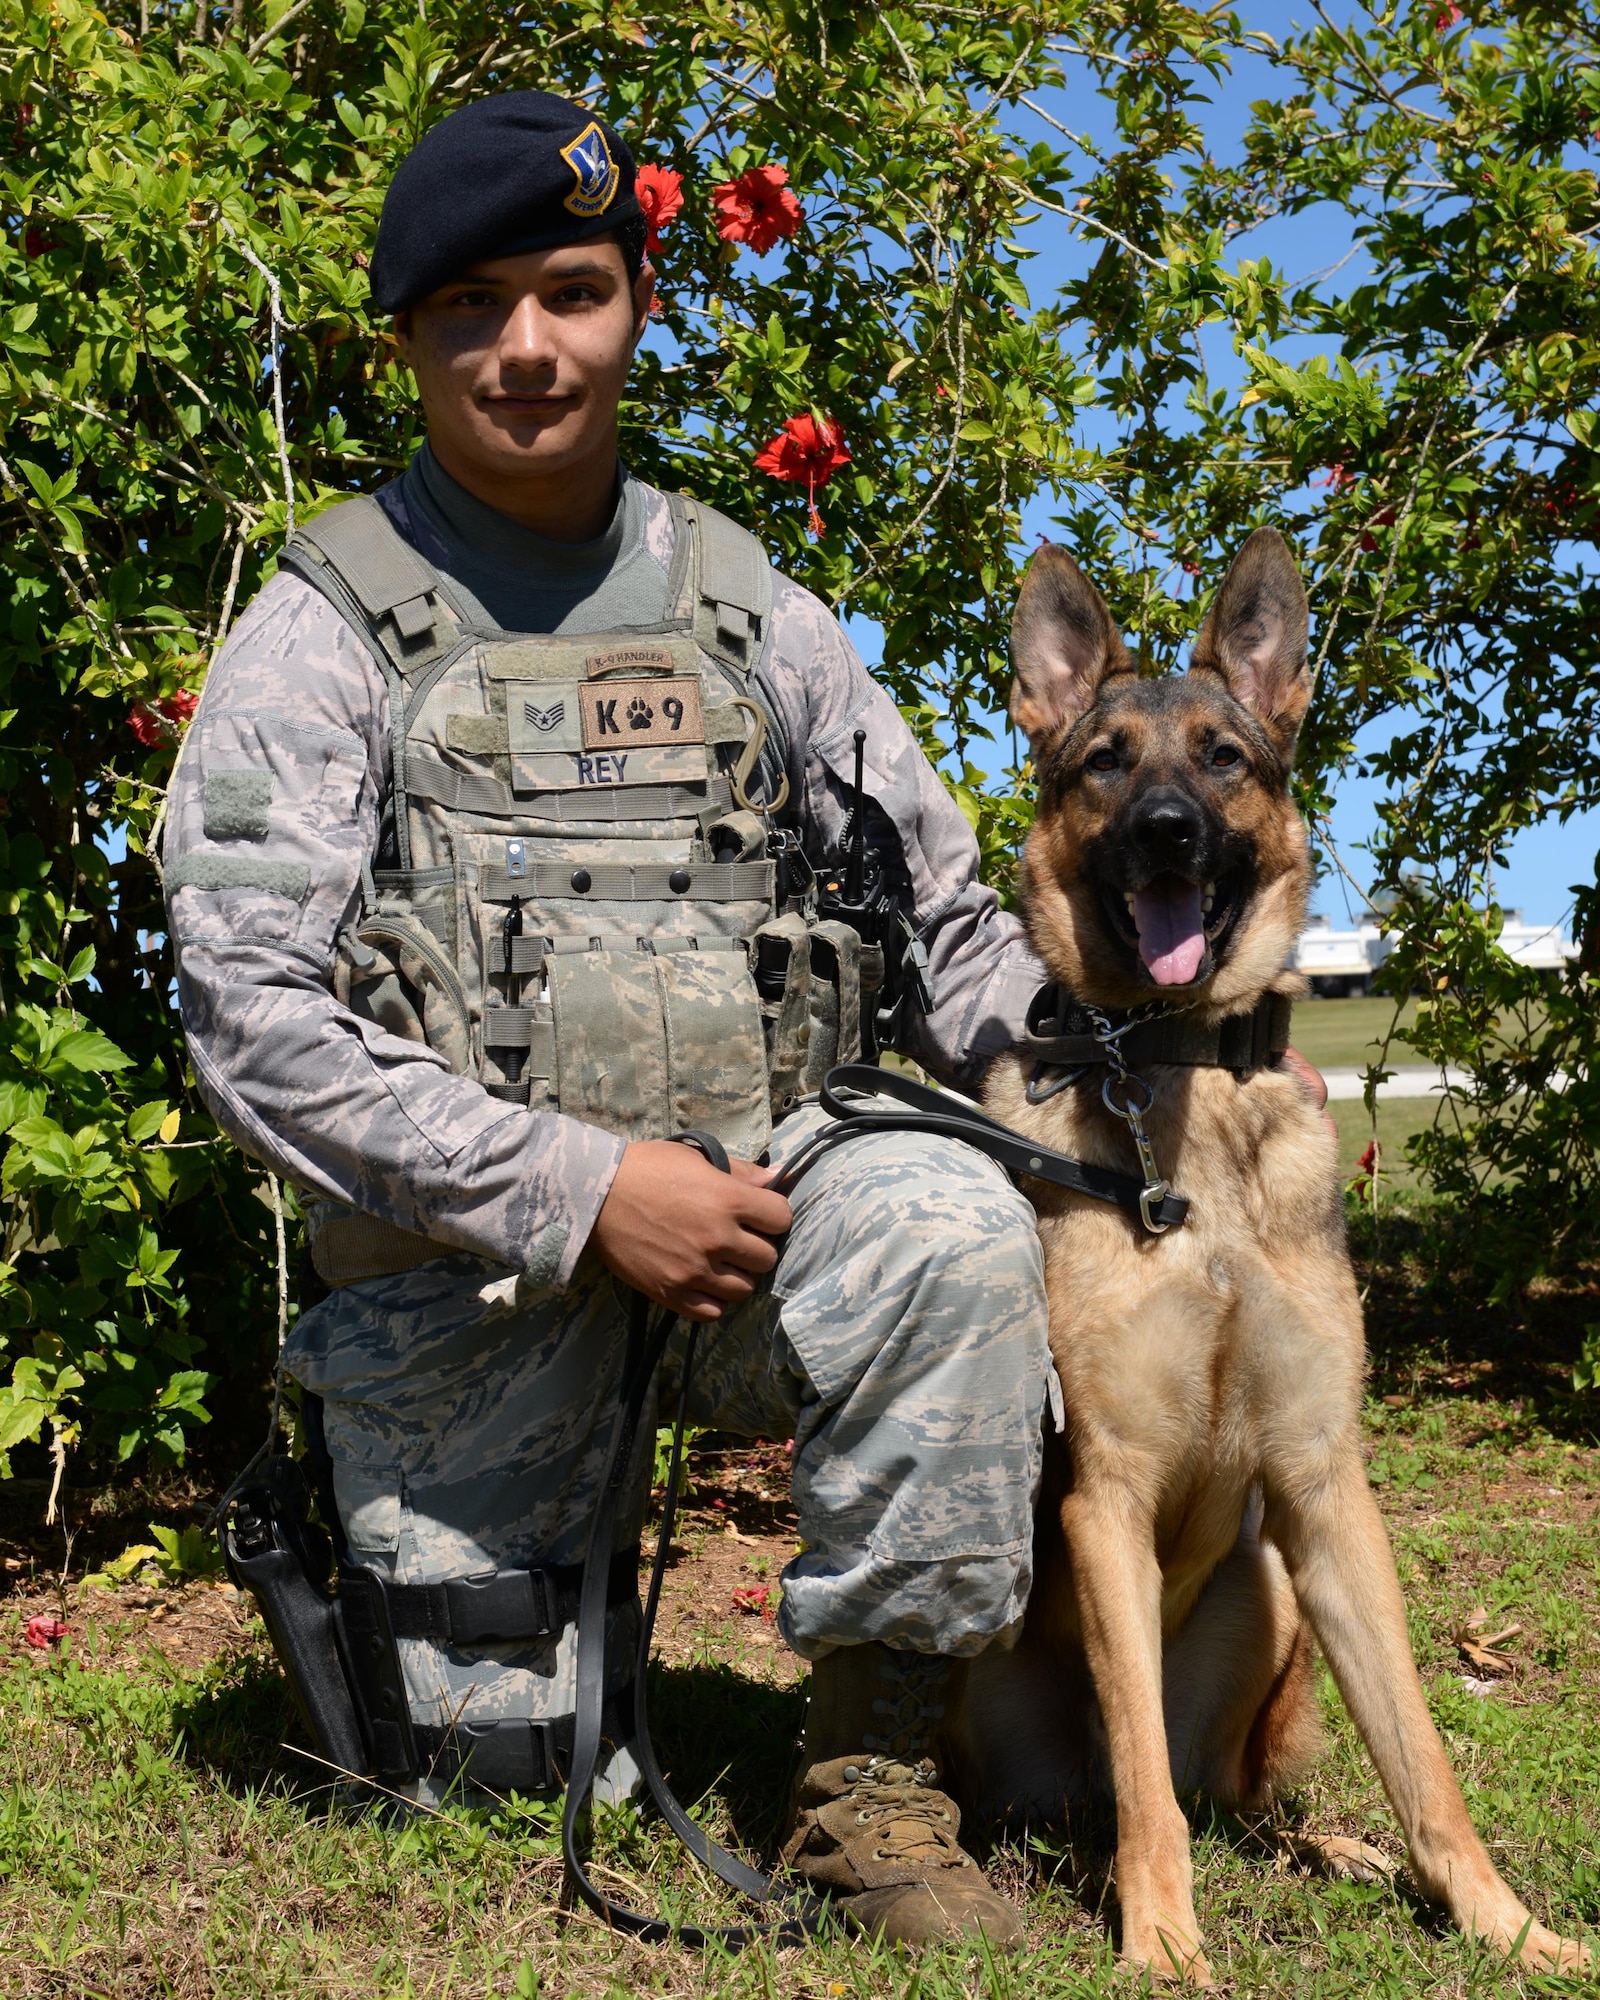 Staff Sgt. Mario Rey, 36th Security Forces Squadron military working dog handler, kneels with his partner Gezu Jan. 14, 2016, at Andersen Air Force Base, Guam. Rey and Gezu were among the team members that recently responded to an incident that occurred off-base at a local high school, which involved authorities from the community as well as the K-9 unit and Explosive Ordnance Disposal flight from Andersen. (U.S Air Force photo/Senior Airman Cierra Presentado)